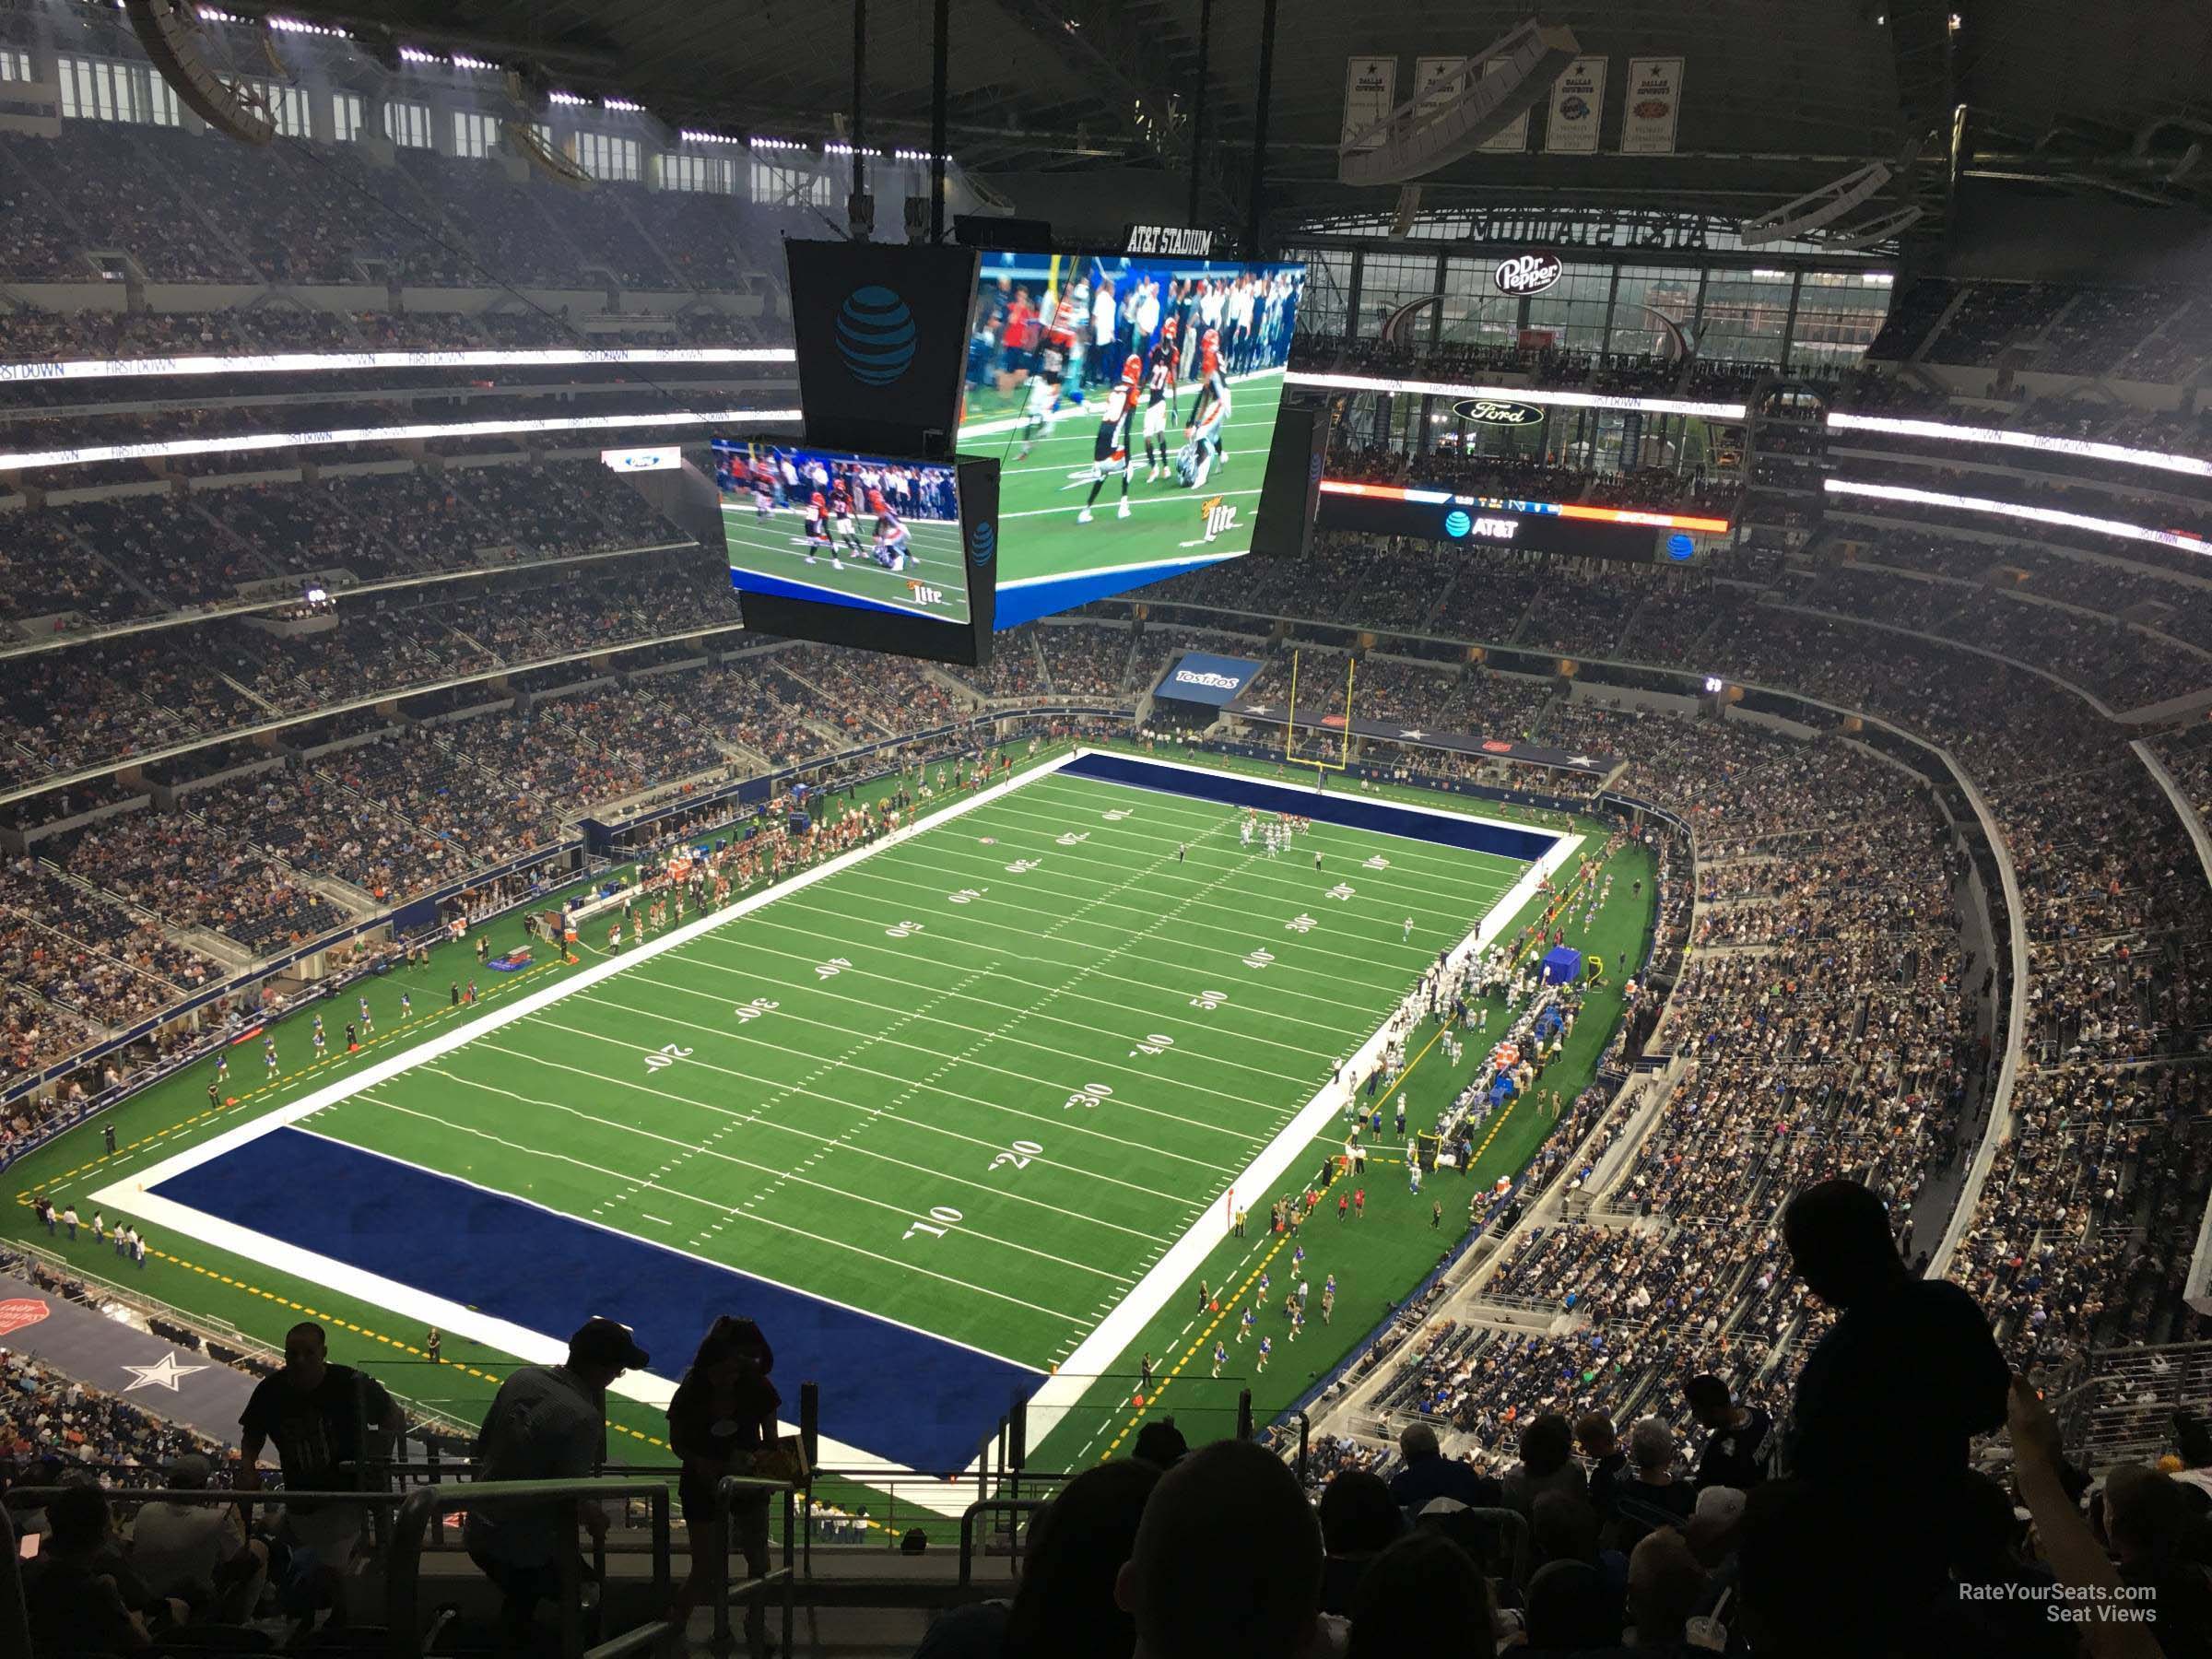 Section 423 at AT&T Stadium 